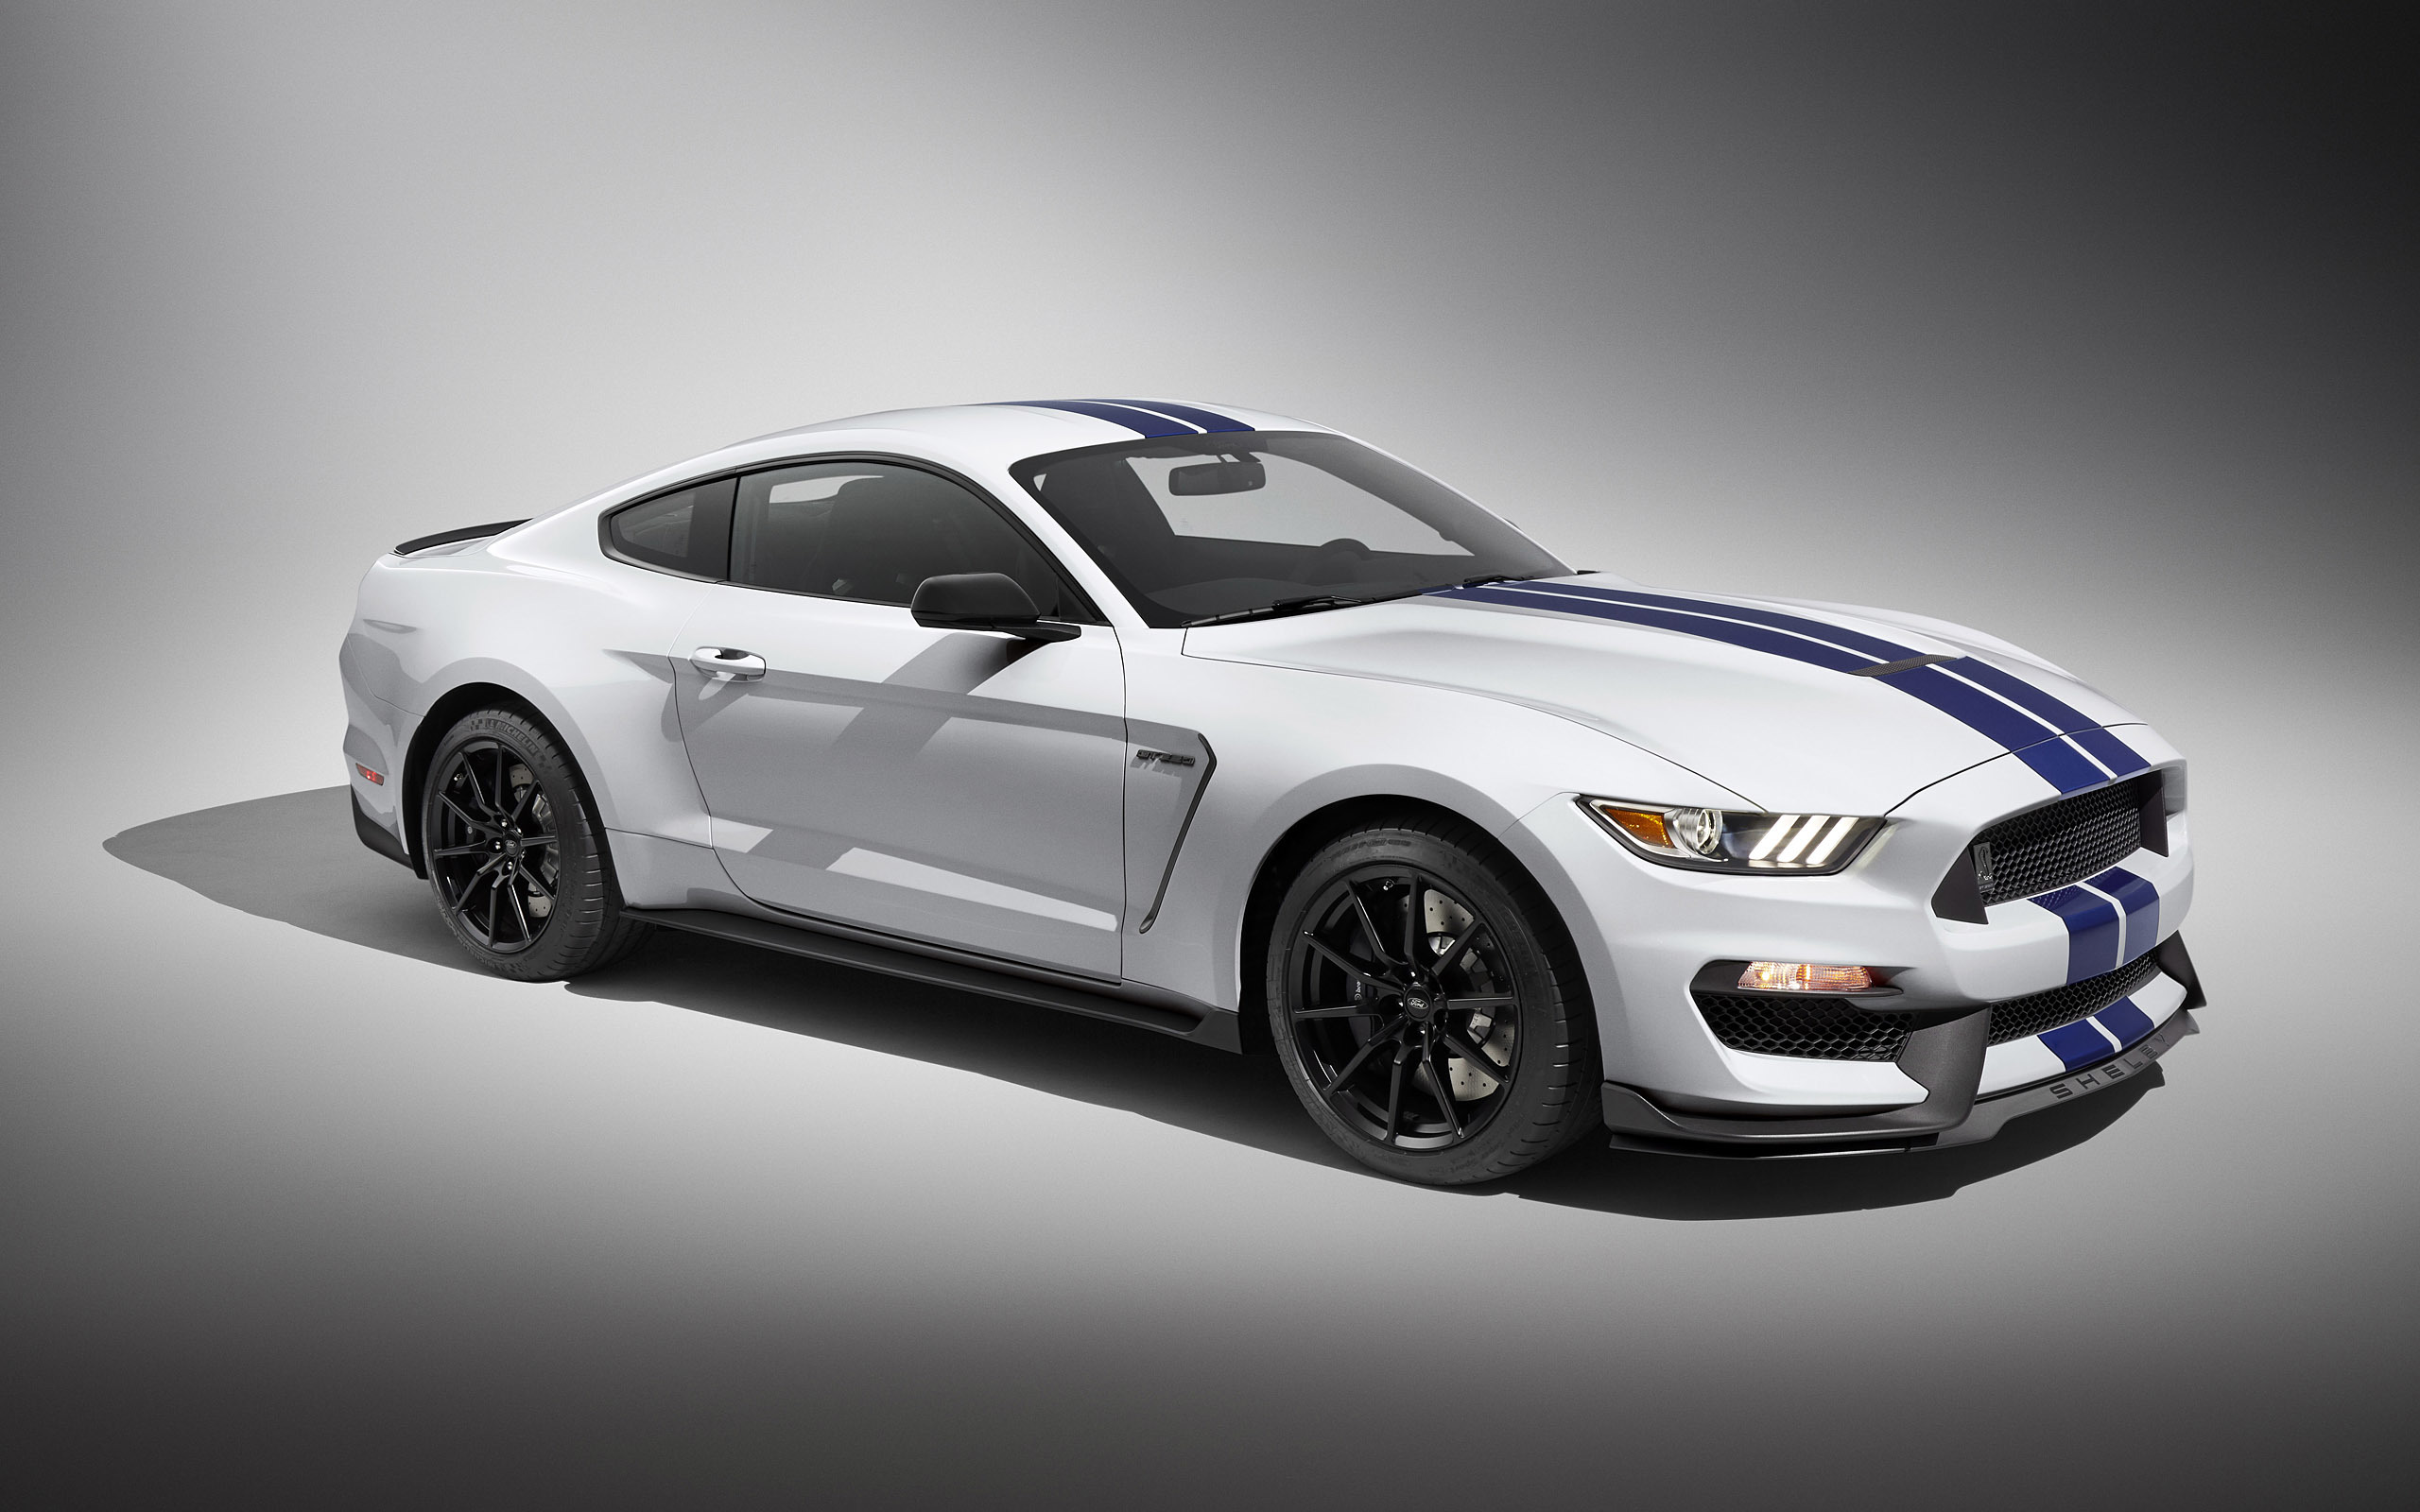 Ford Mustang Shelby Gt350 Wallpaper Photos Pictures